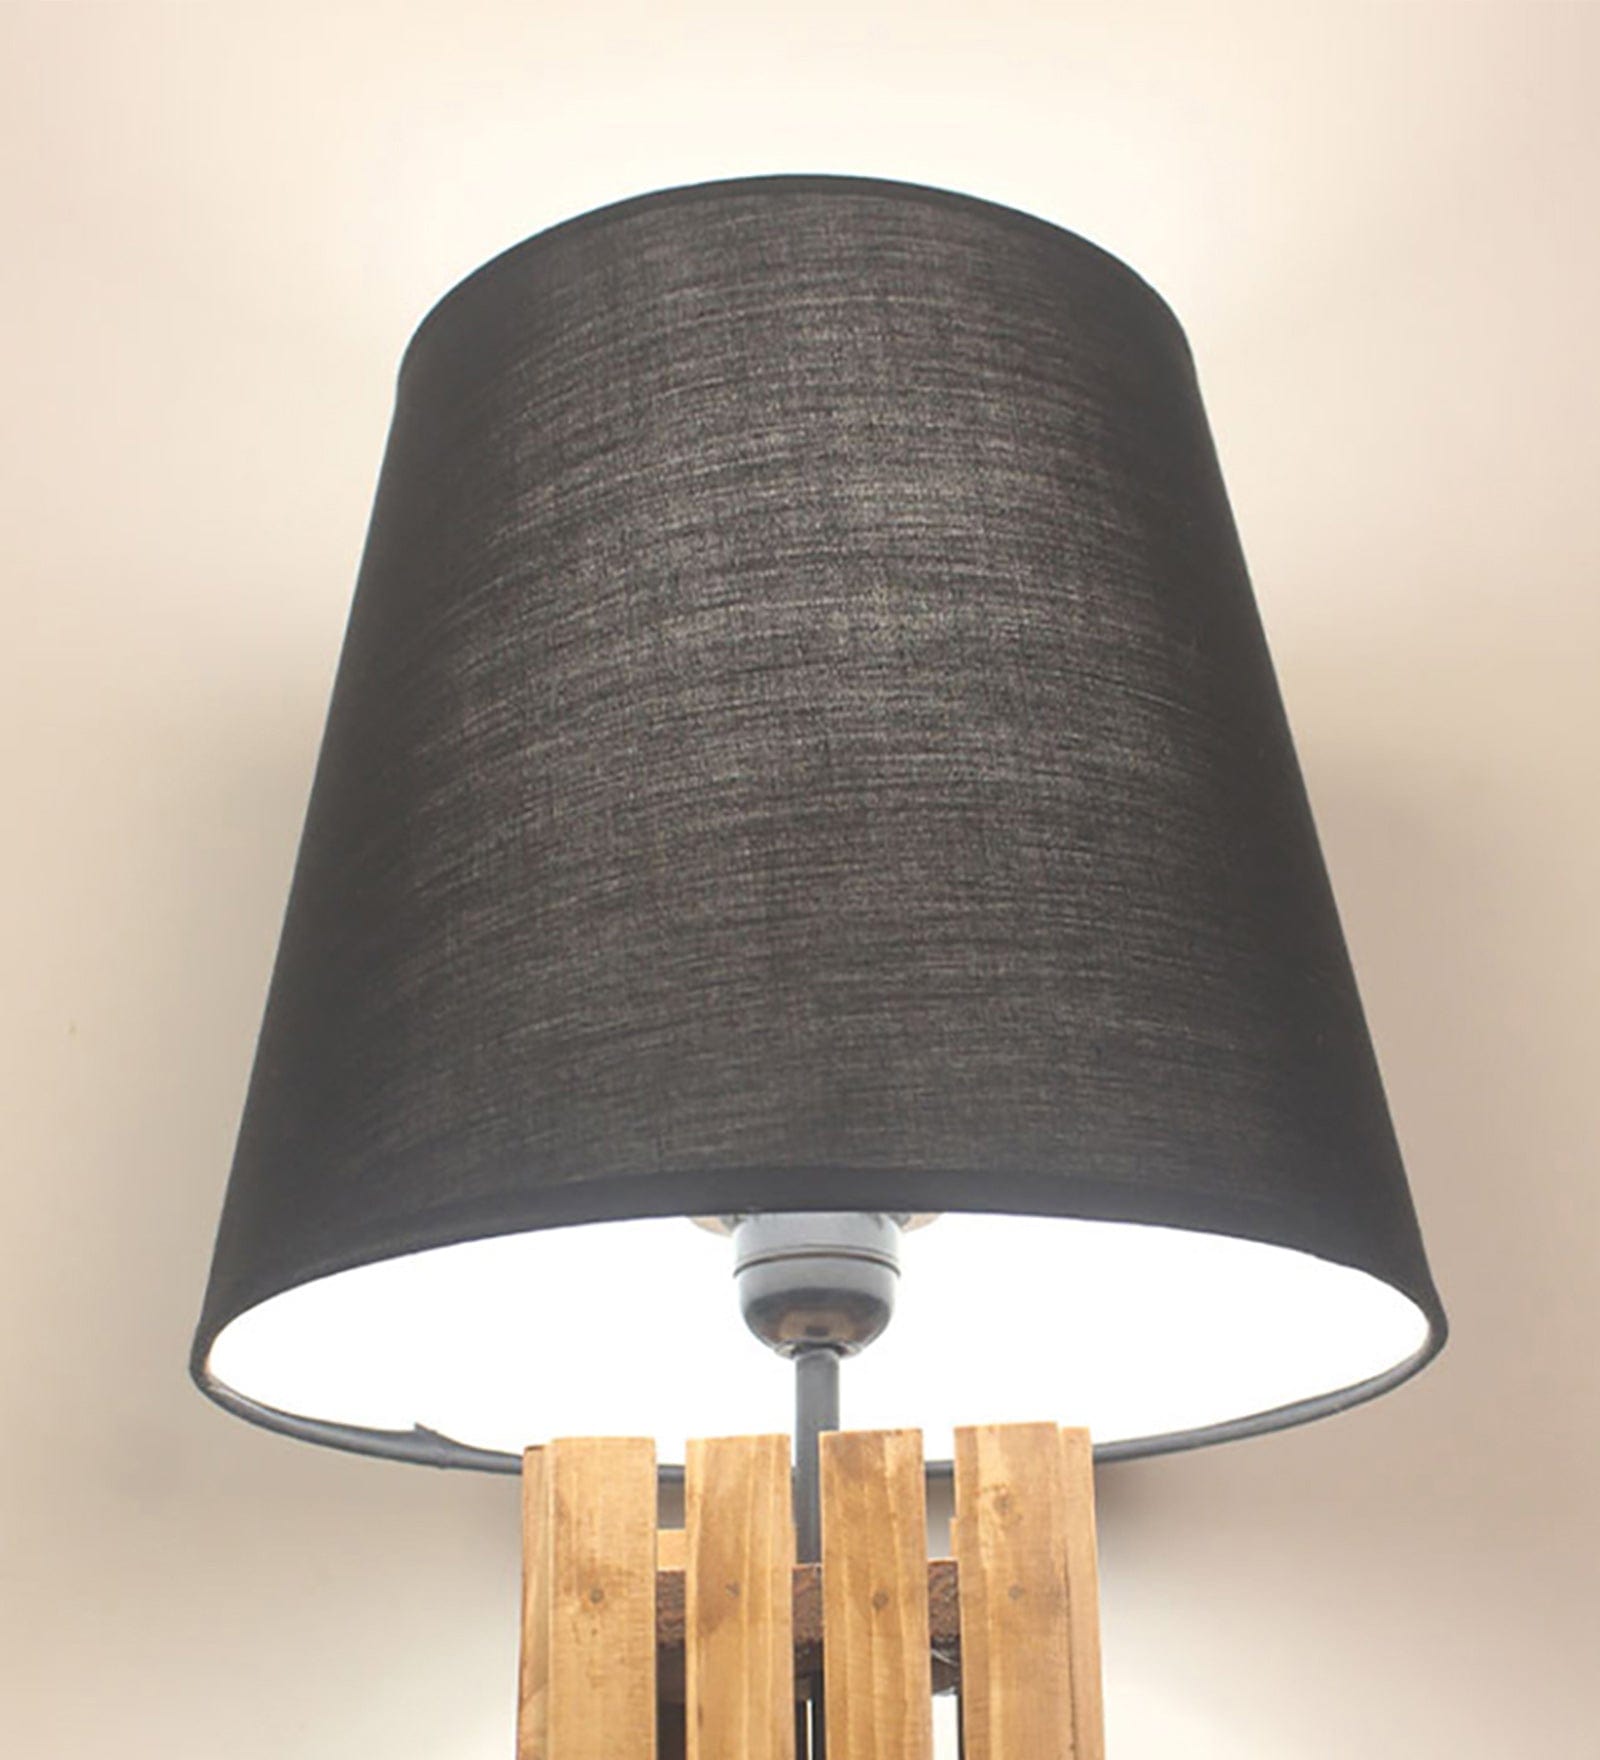 Elegant Brown Wooden Table Lamp with Black Fabric Lampshade (BULB NOT INCLUDED)